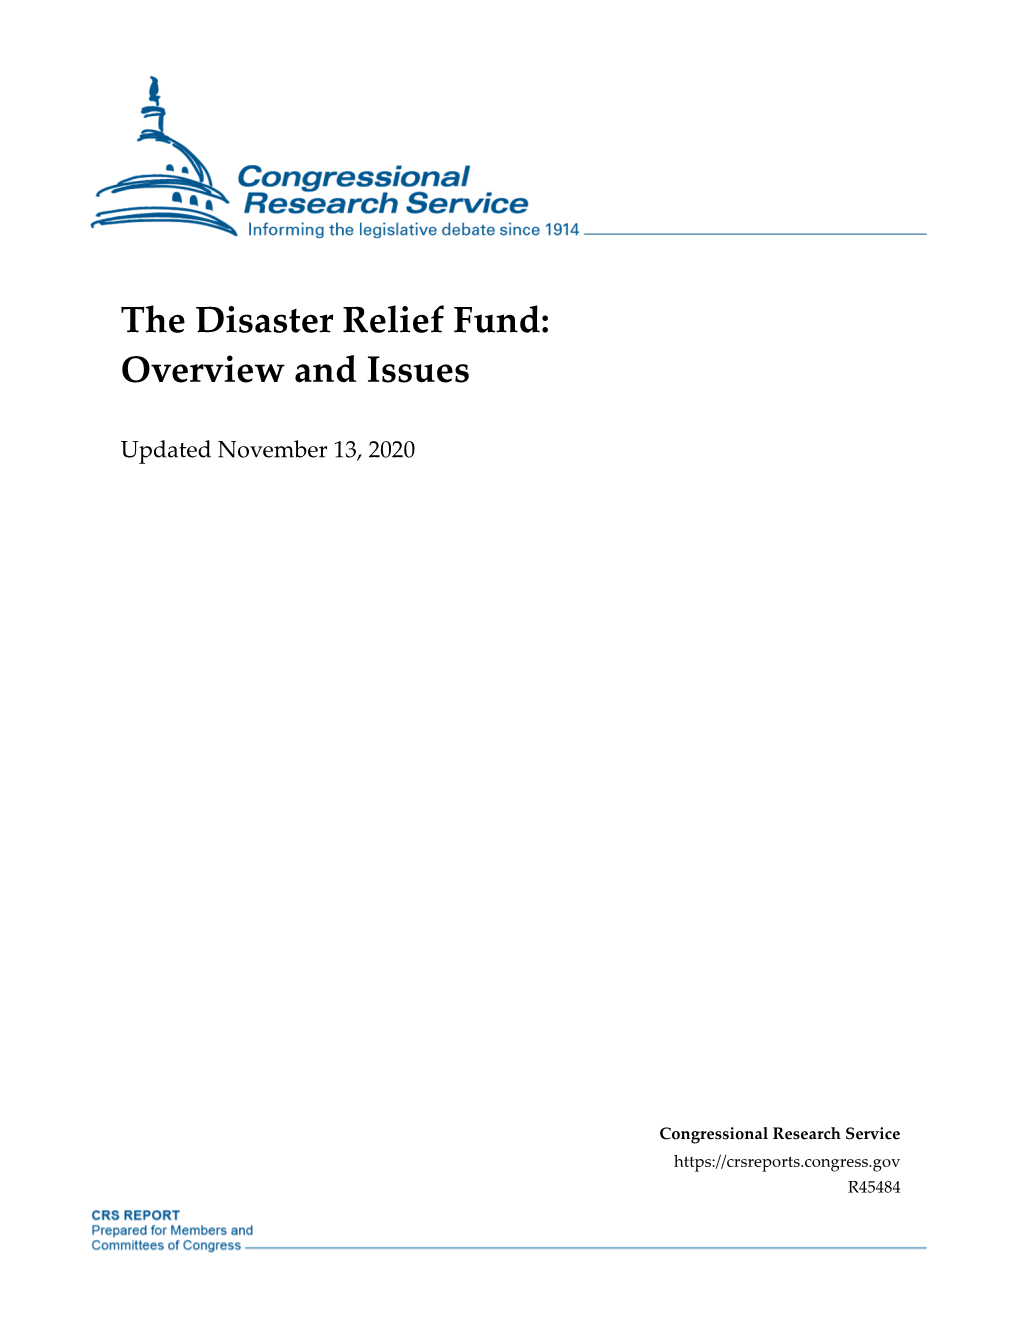 The Disaster Relief Fund: Overview and Issues